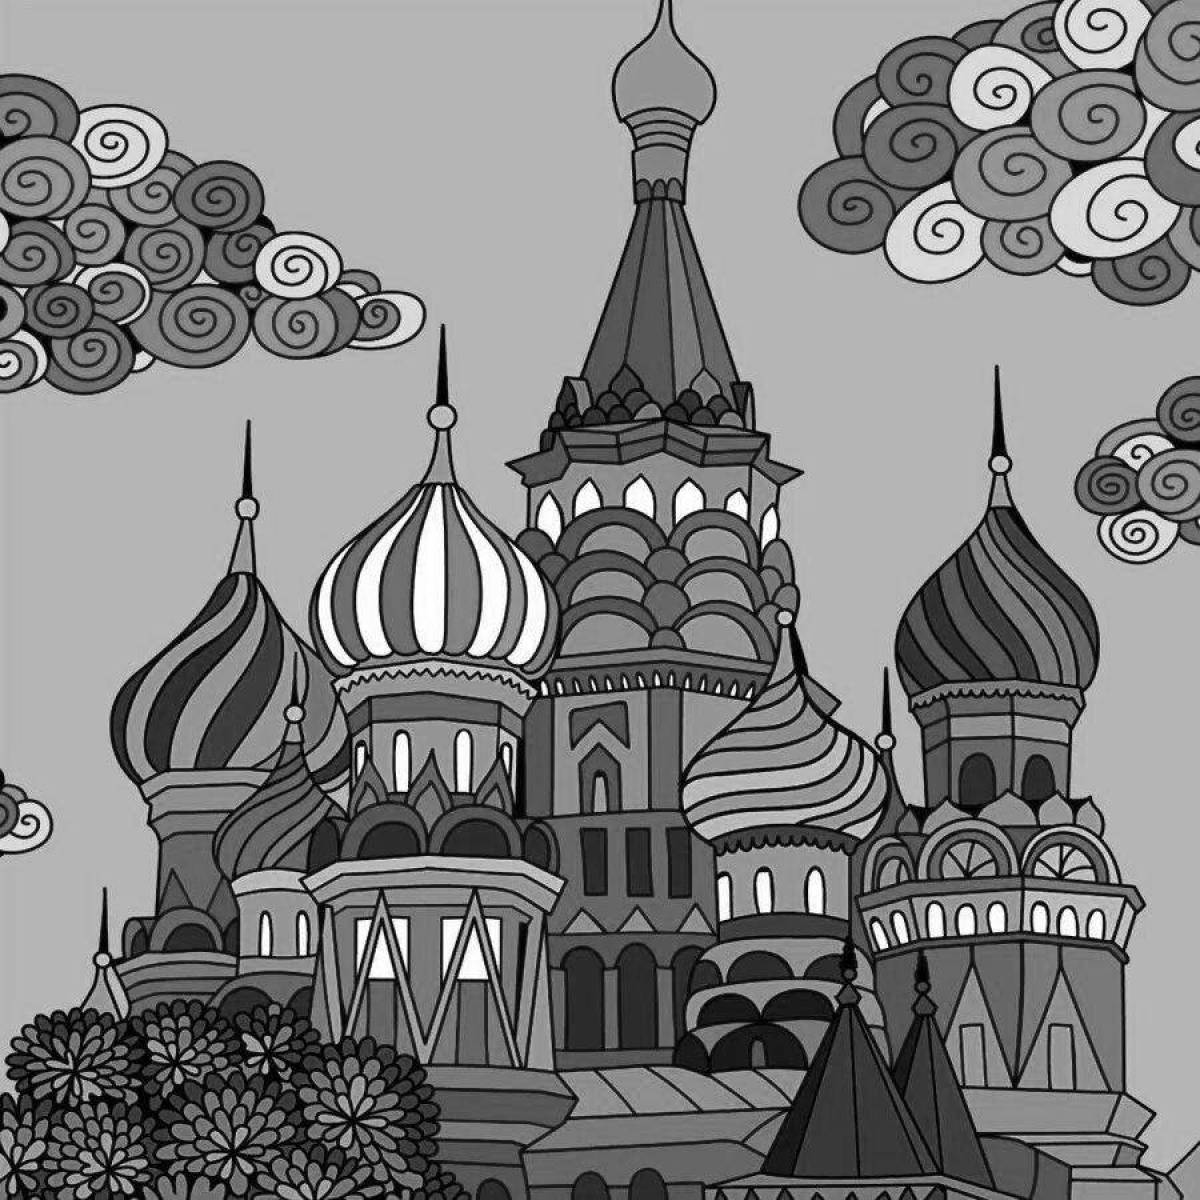 Coloring page saint basil's cathedral